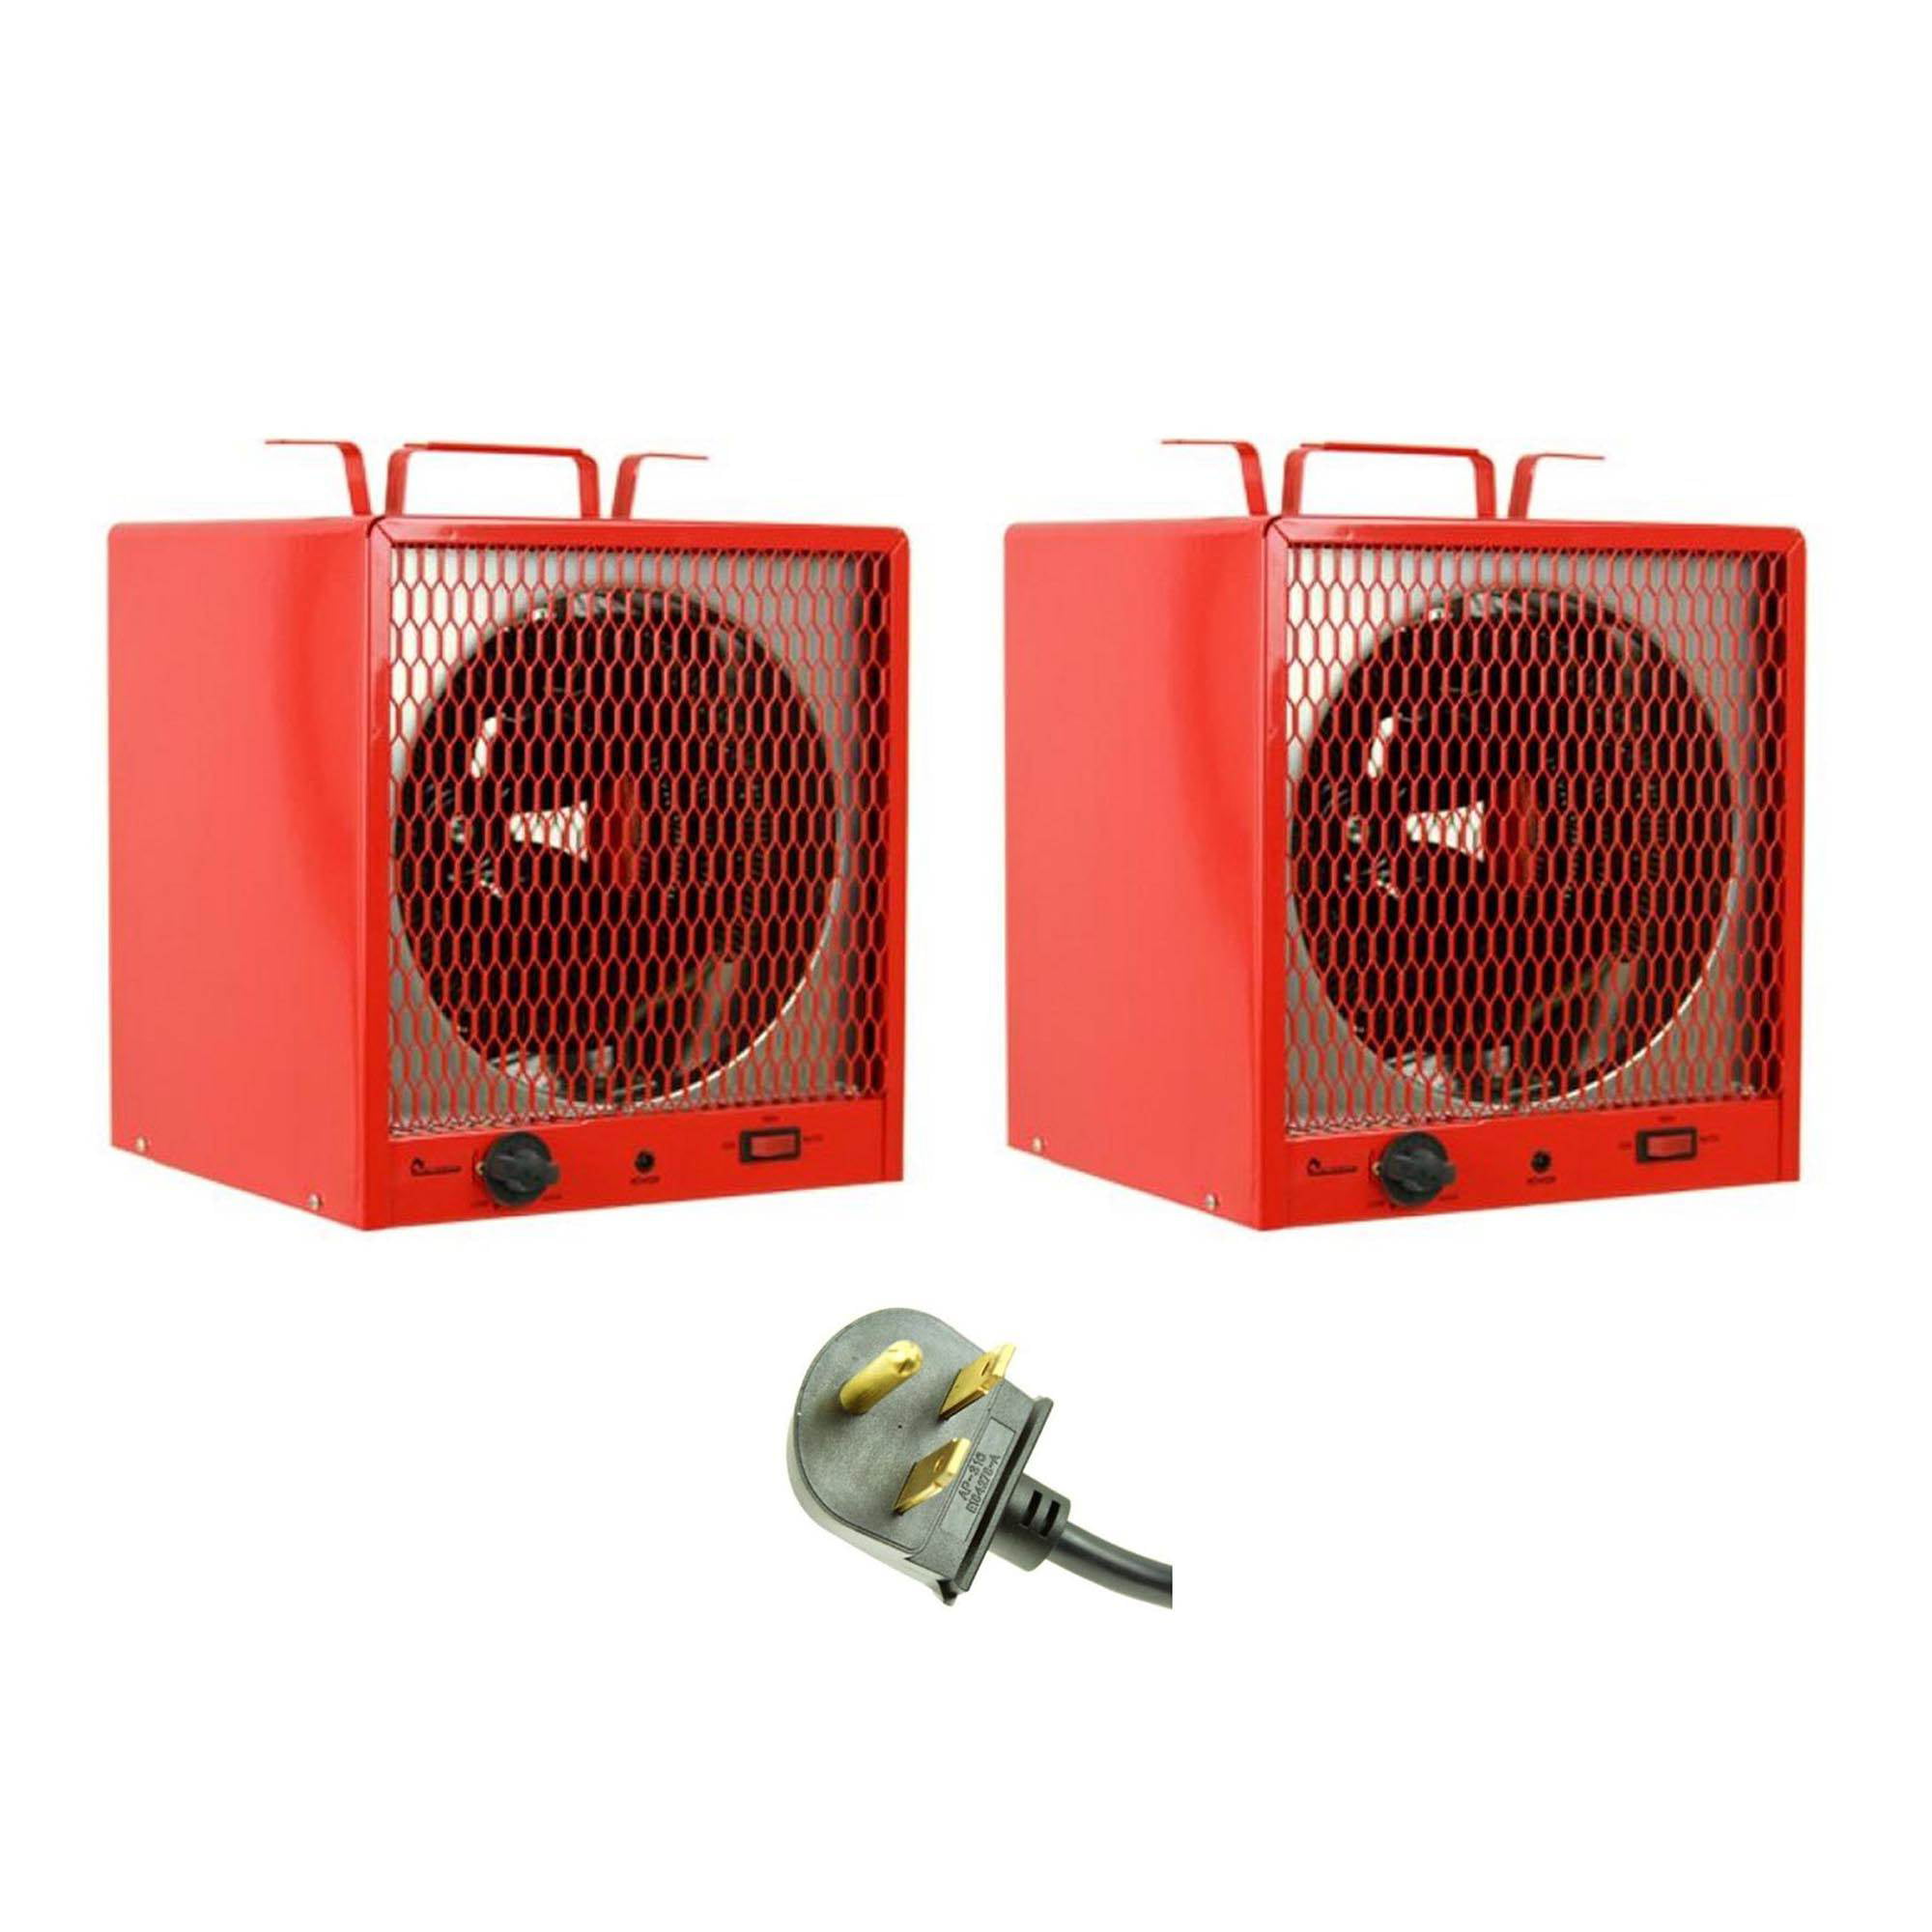 Portable Propane Heater - Wide Number Of Uses